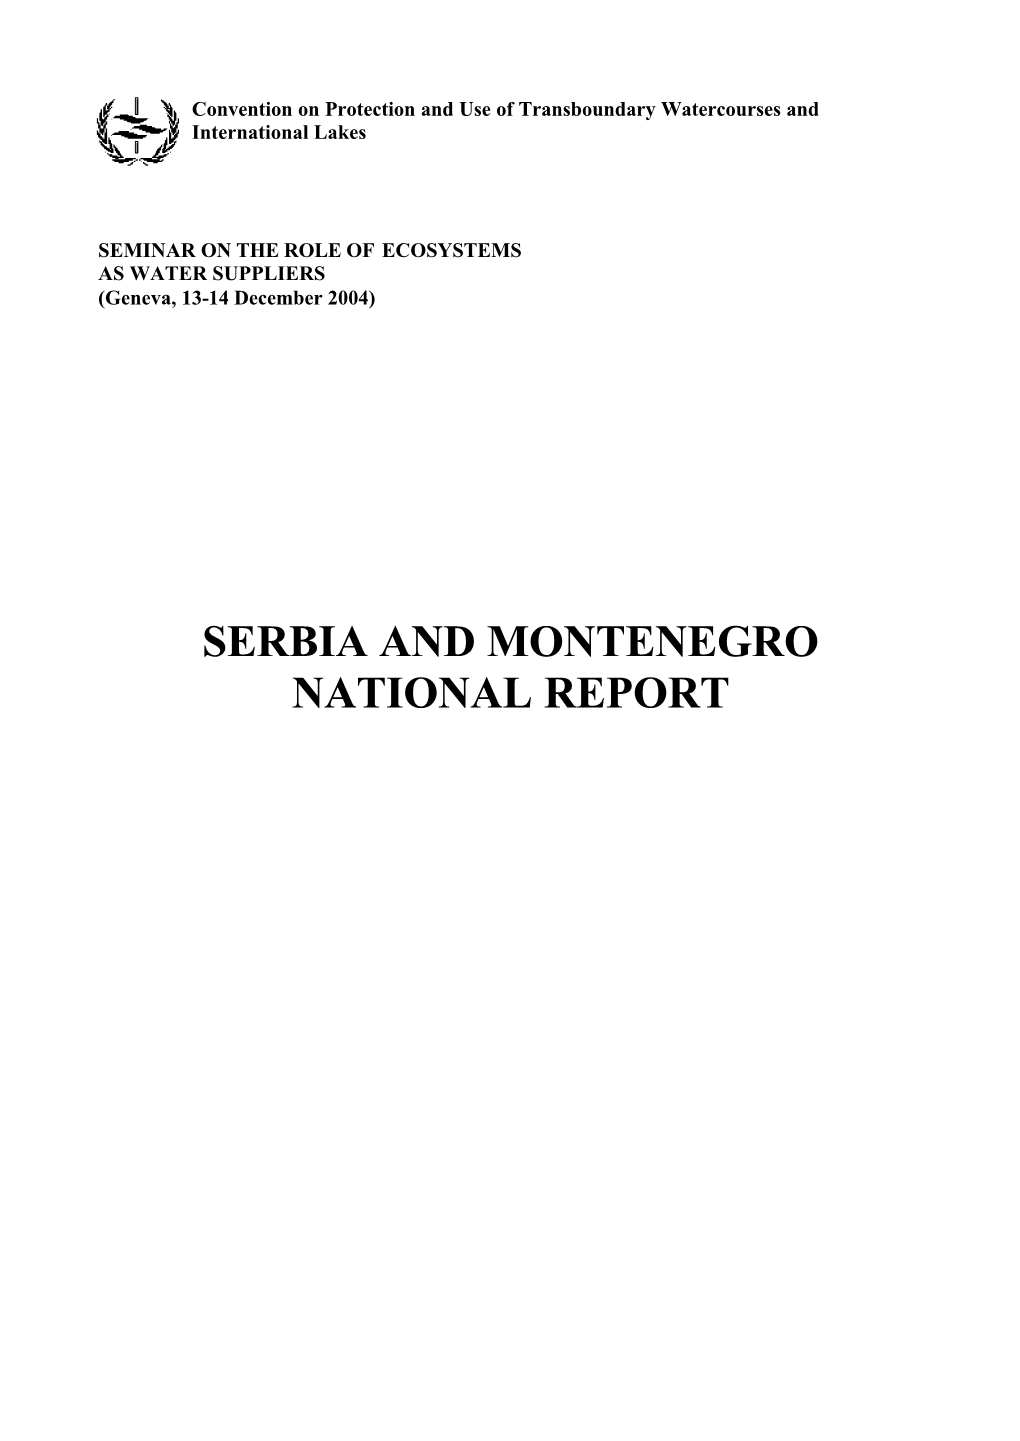 Serbia and Montenegro National Report